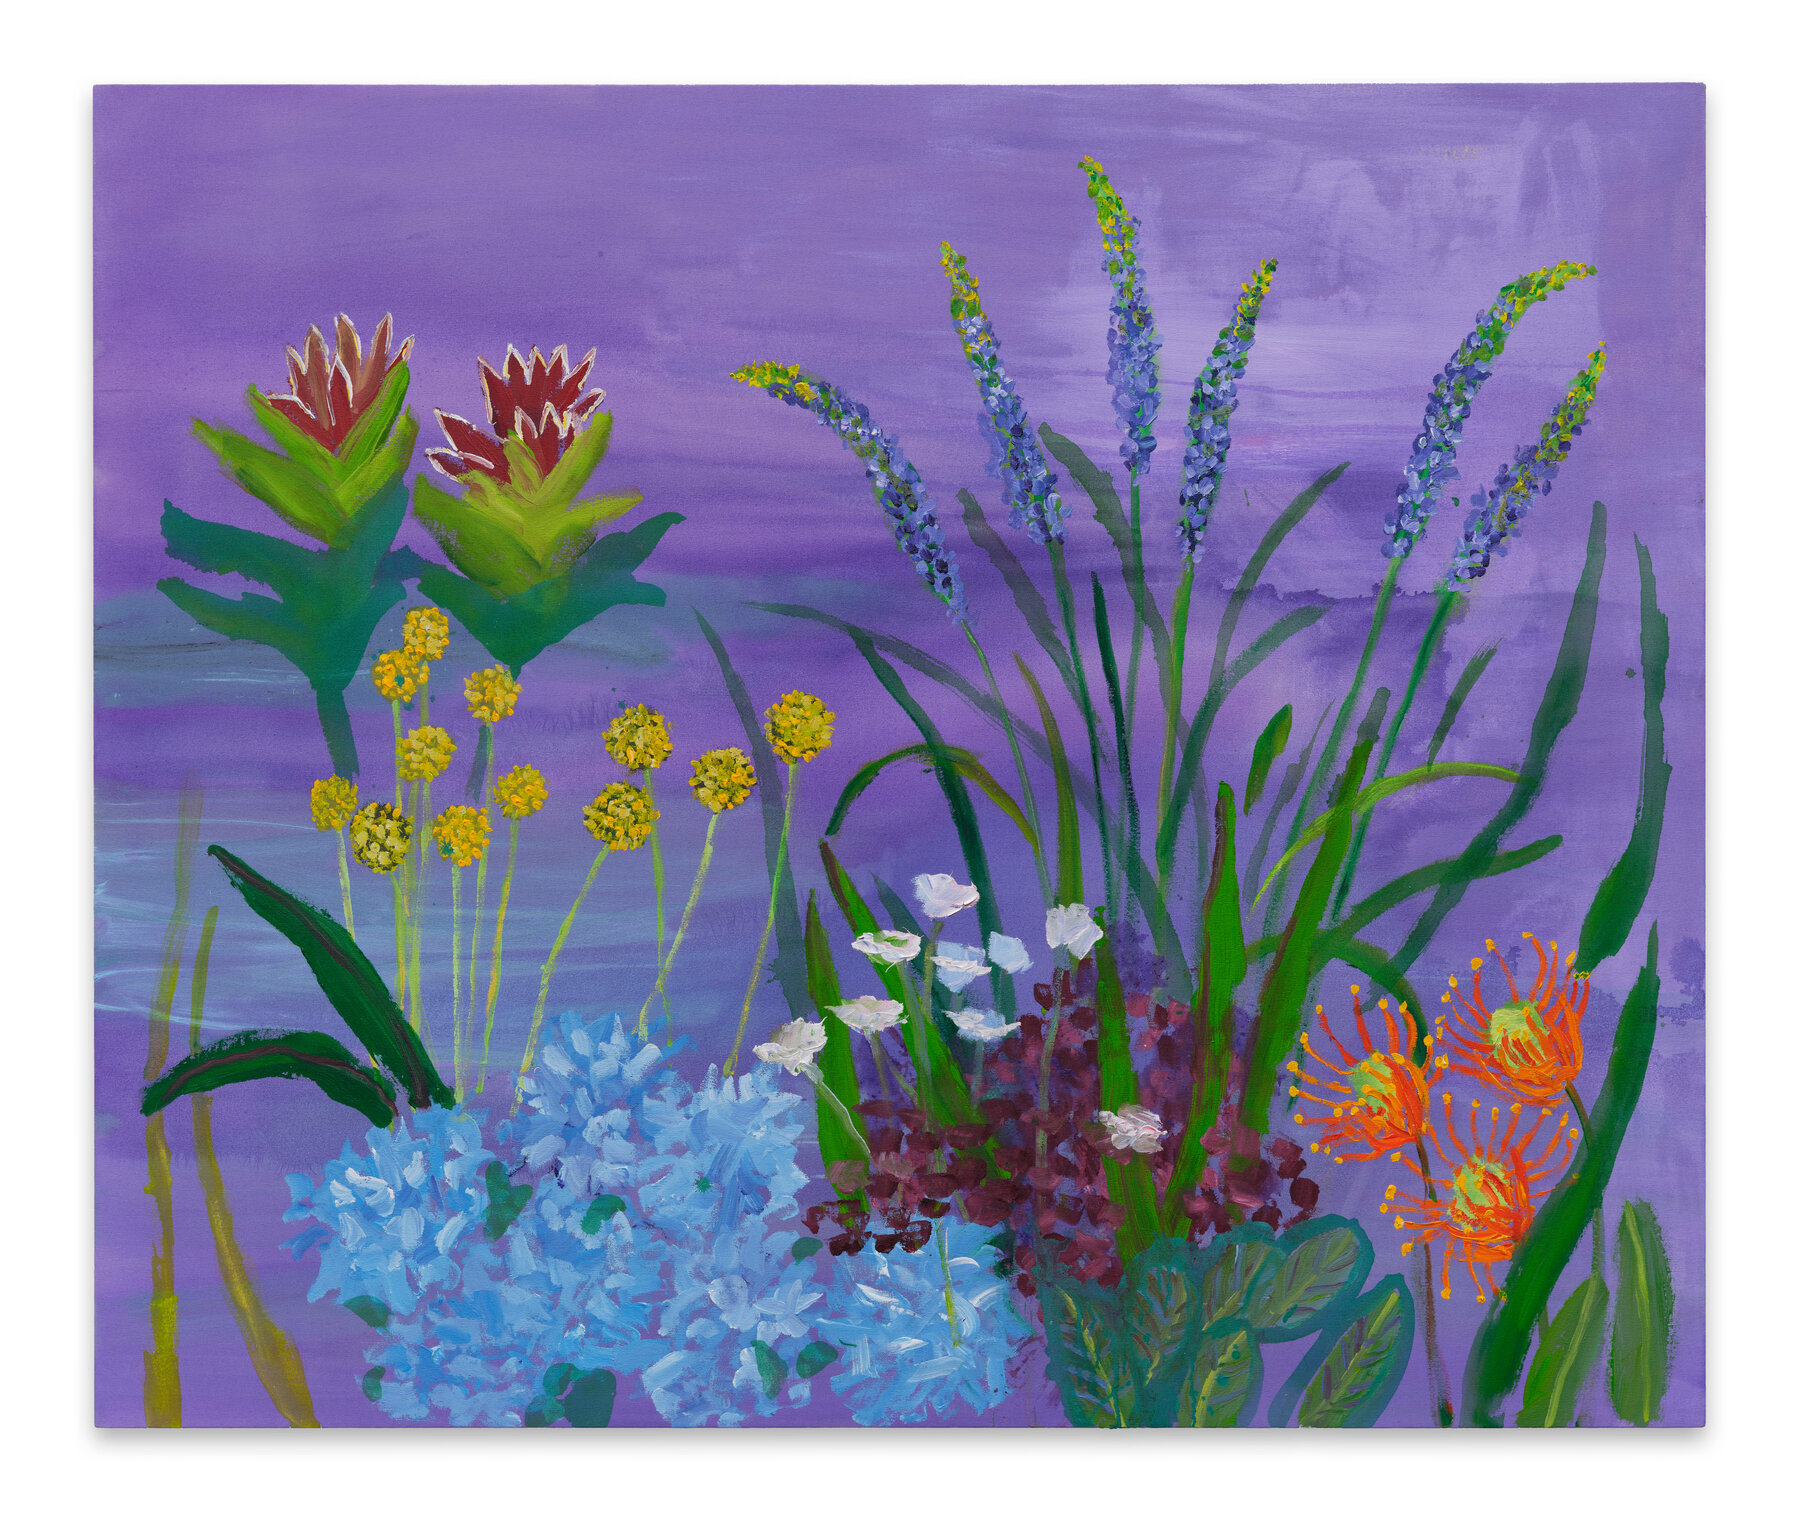 A floral painting with a purple background.